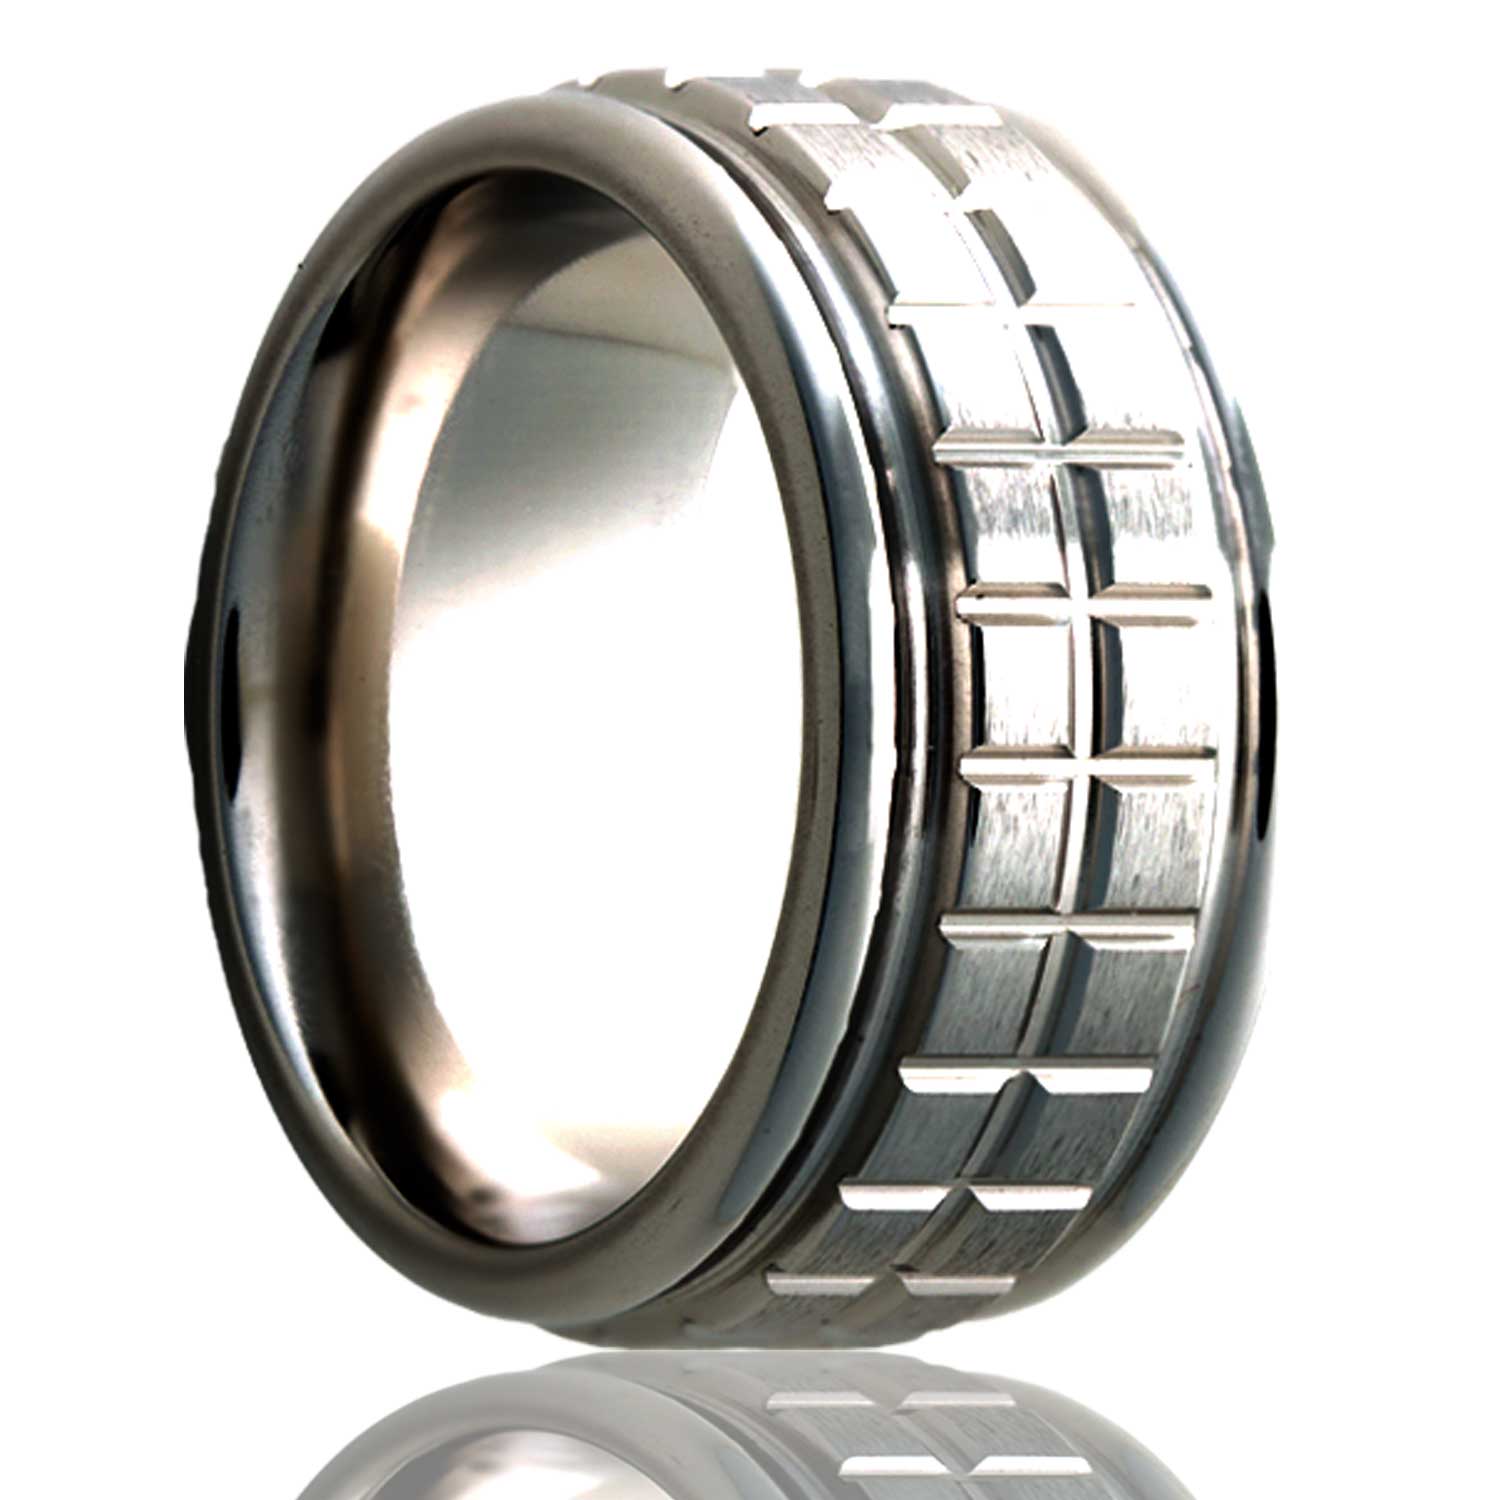 A grooved check pattern satin finish grooved titanium wedding band displayed on a neutral white background.